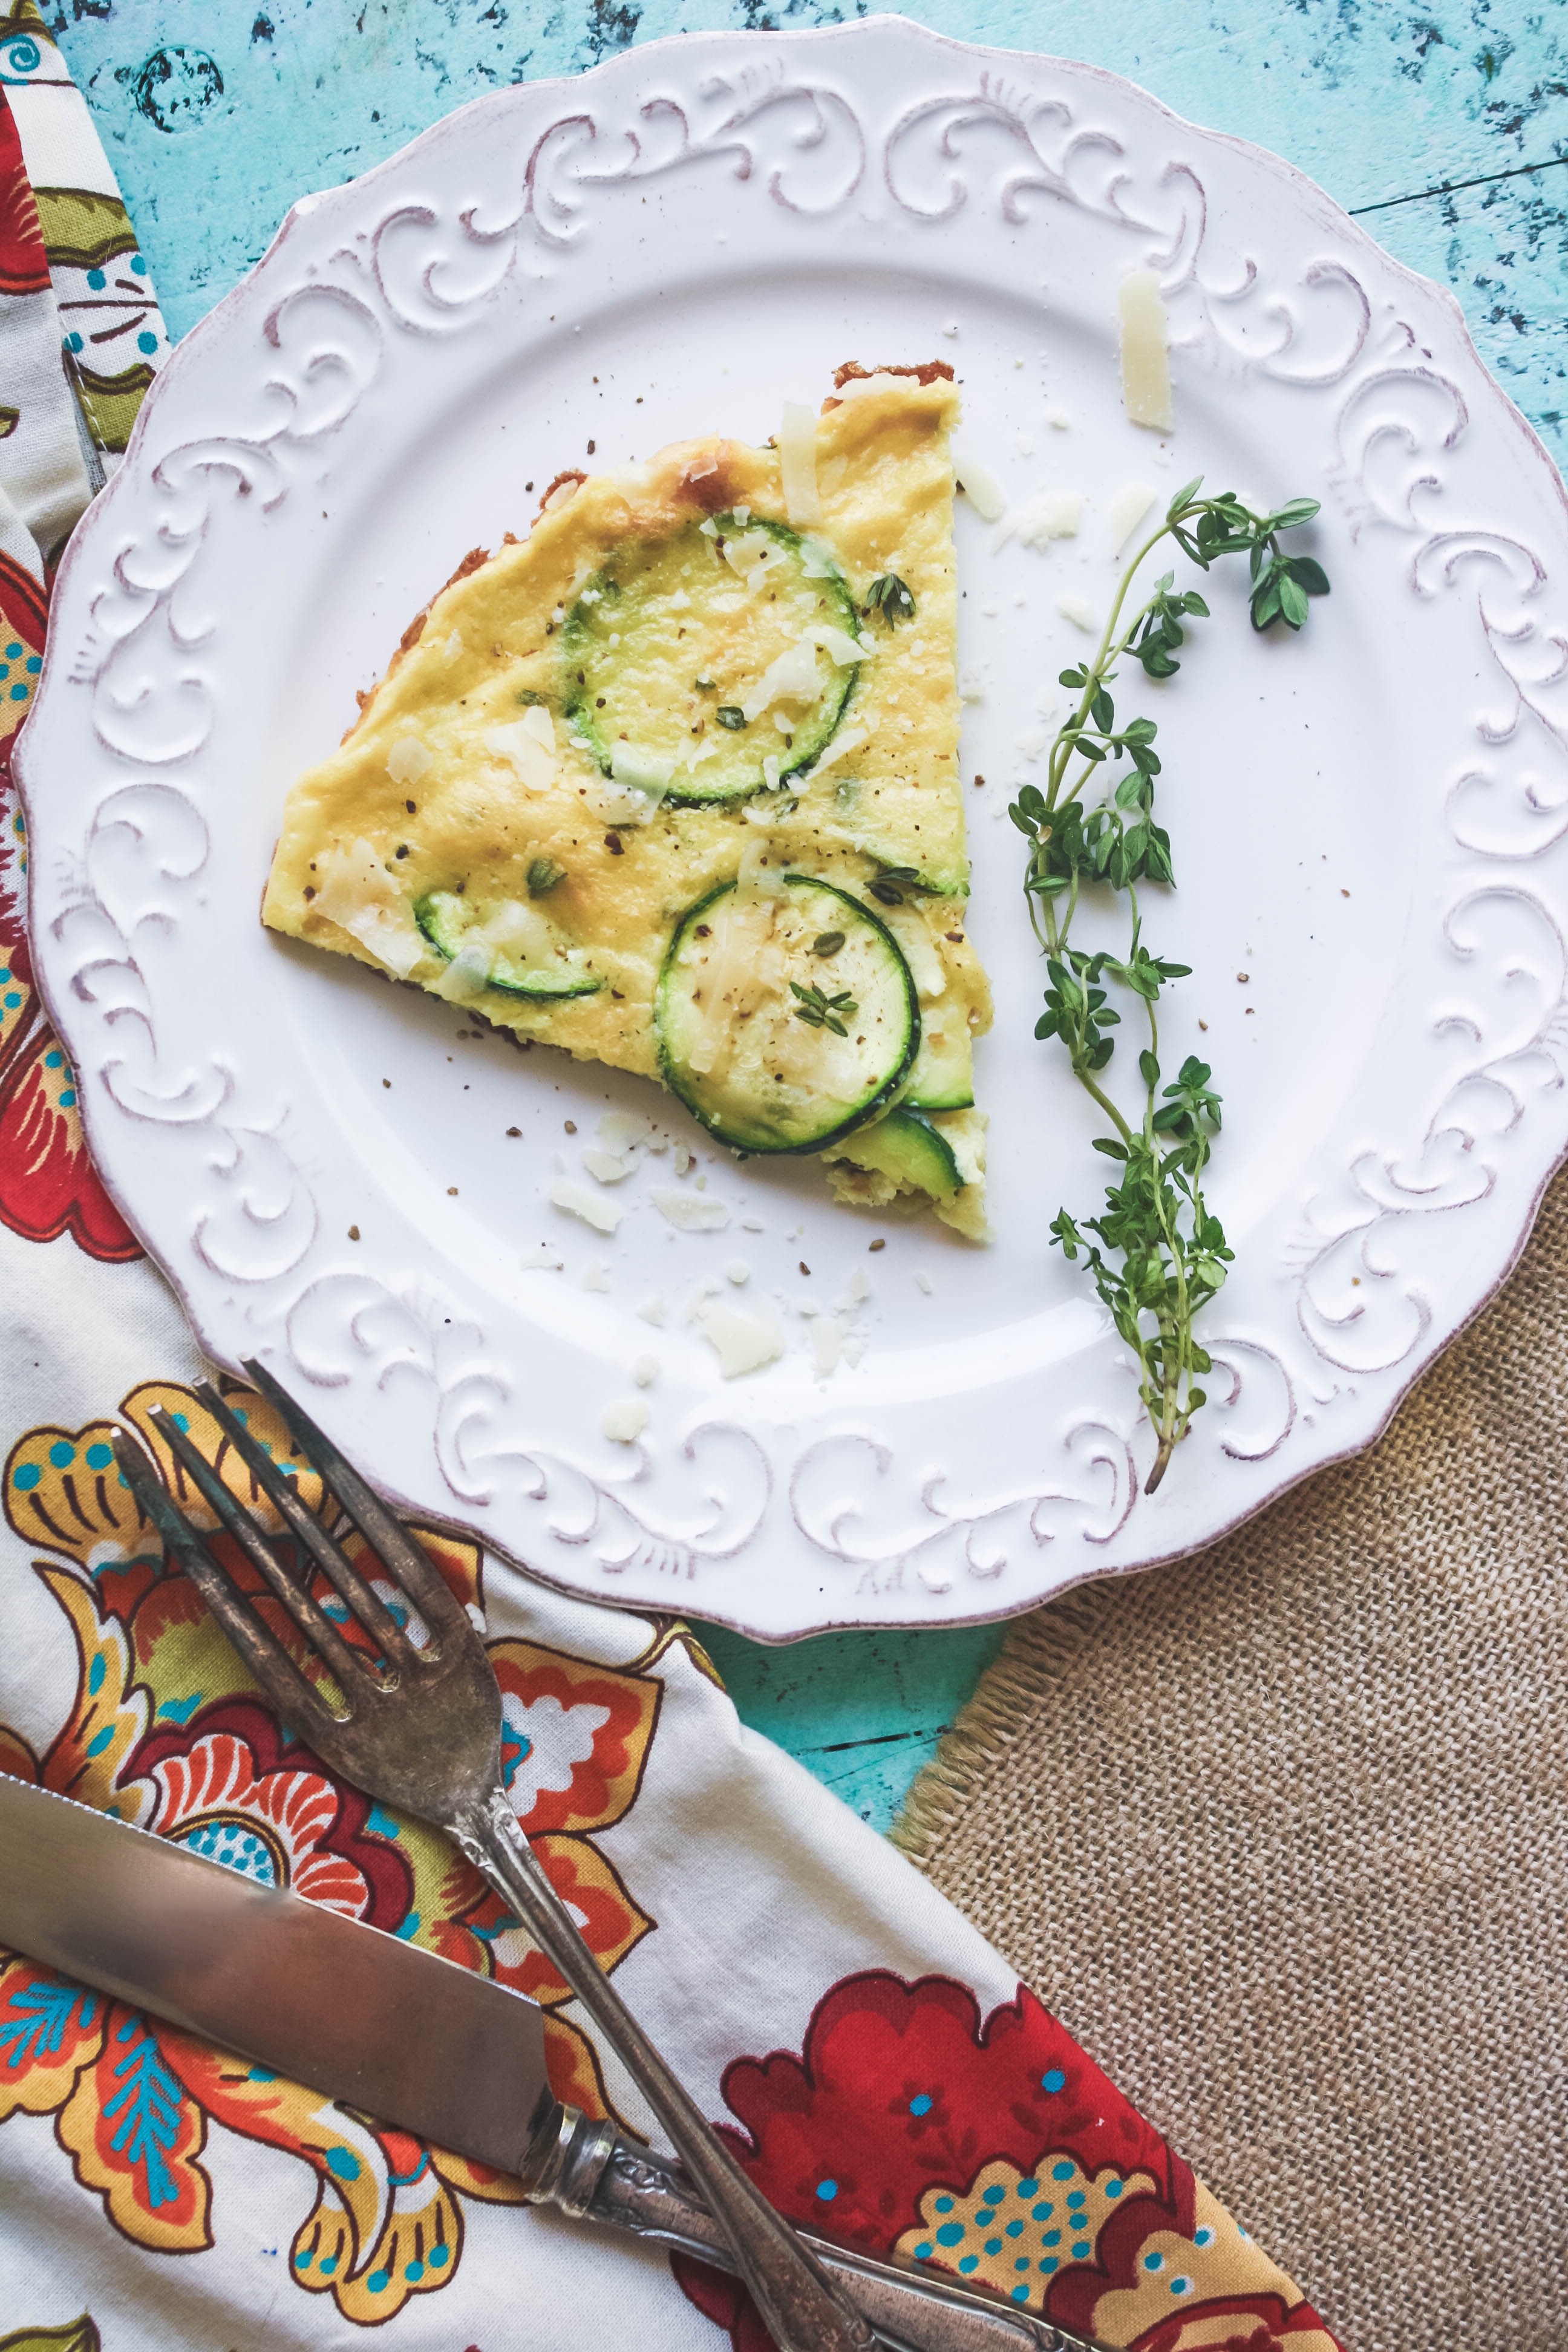 Zucchini-thyme frittata for two is the perfect breakfast to share with someone. Zucchini-thyme frittata for two is ideal when there are only a few of you at breakfast.